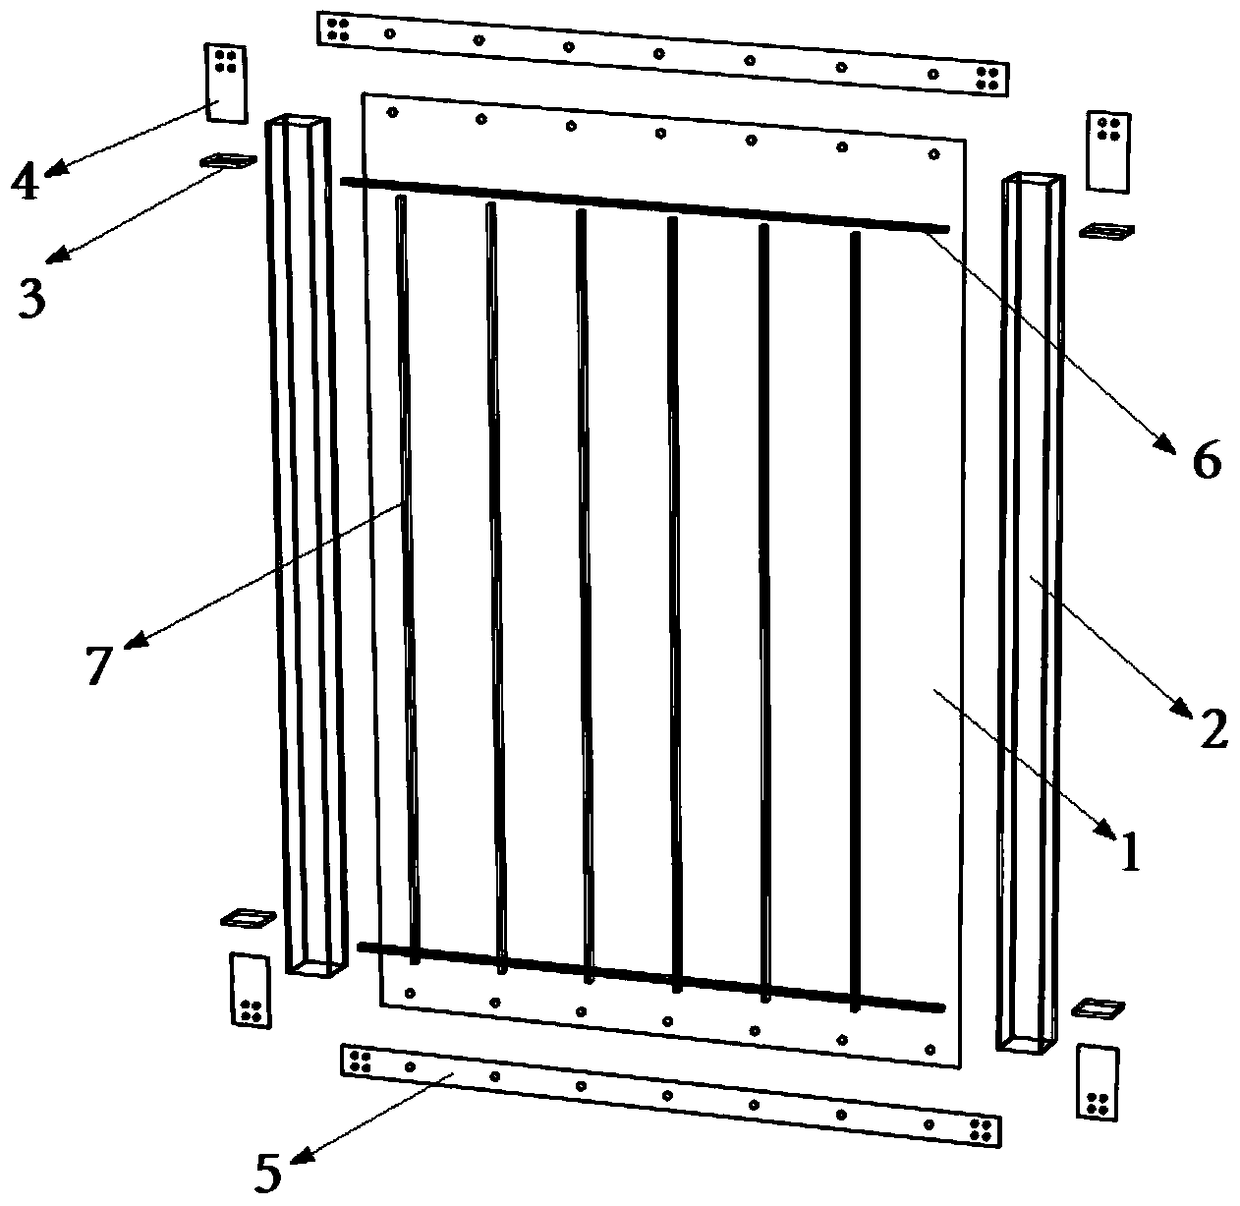 A prefabricated steel plate shear wall with frame and ribs